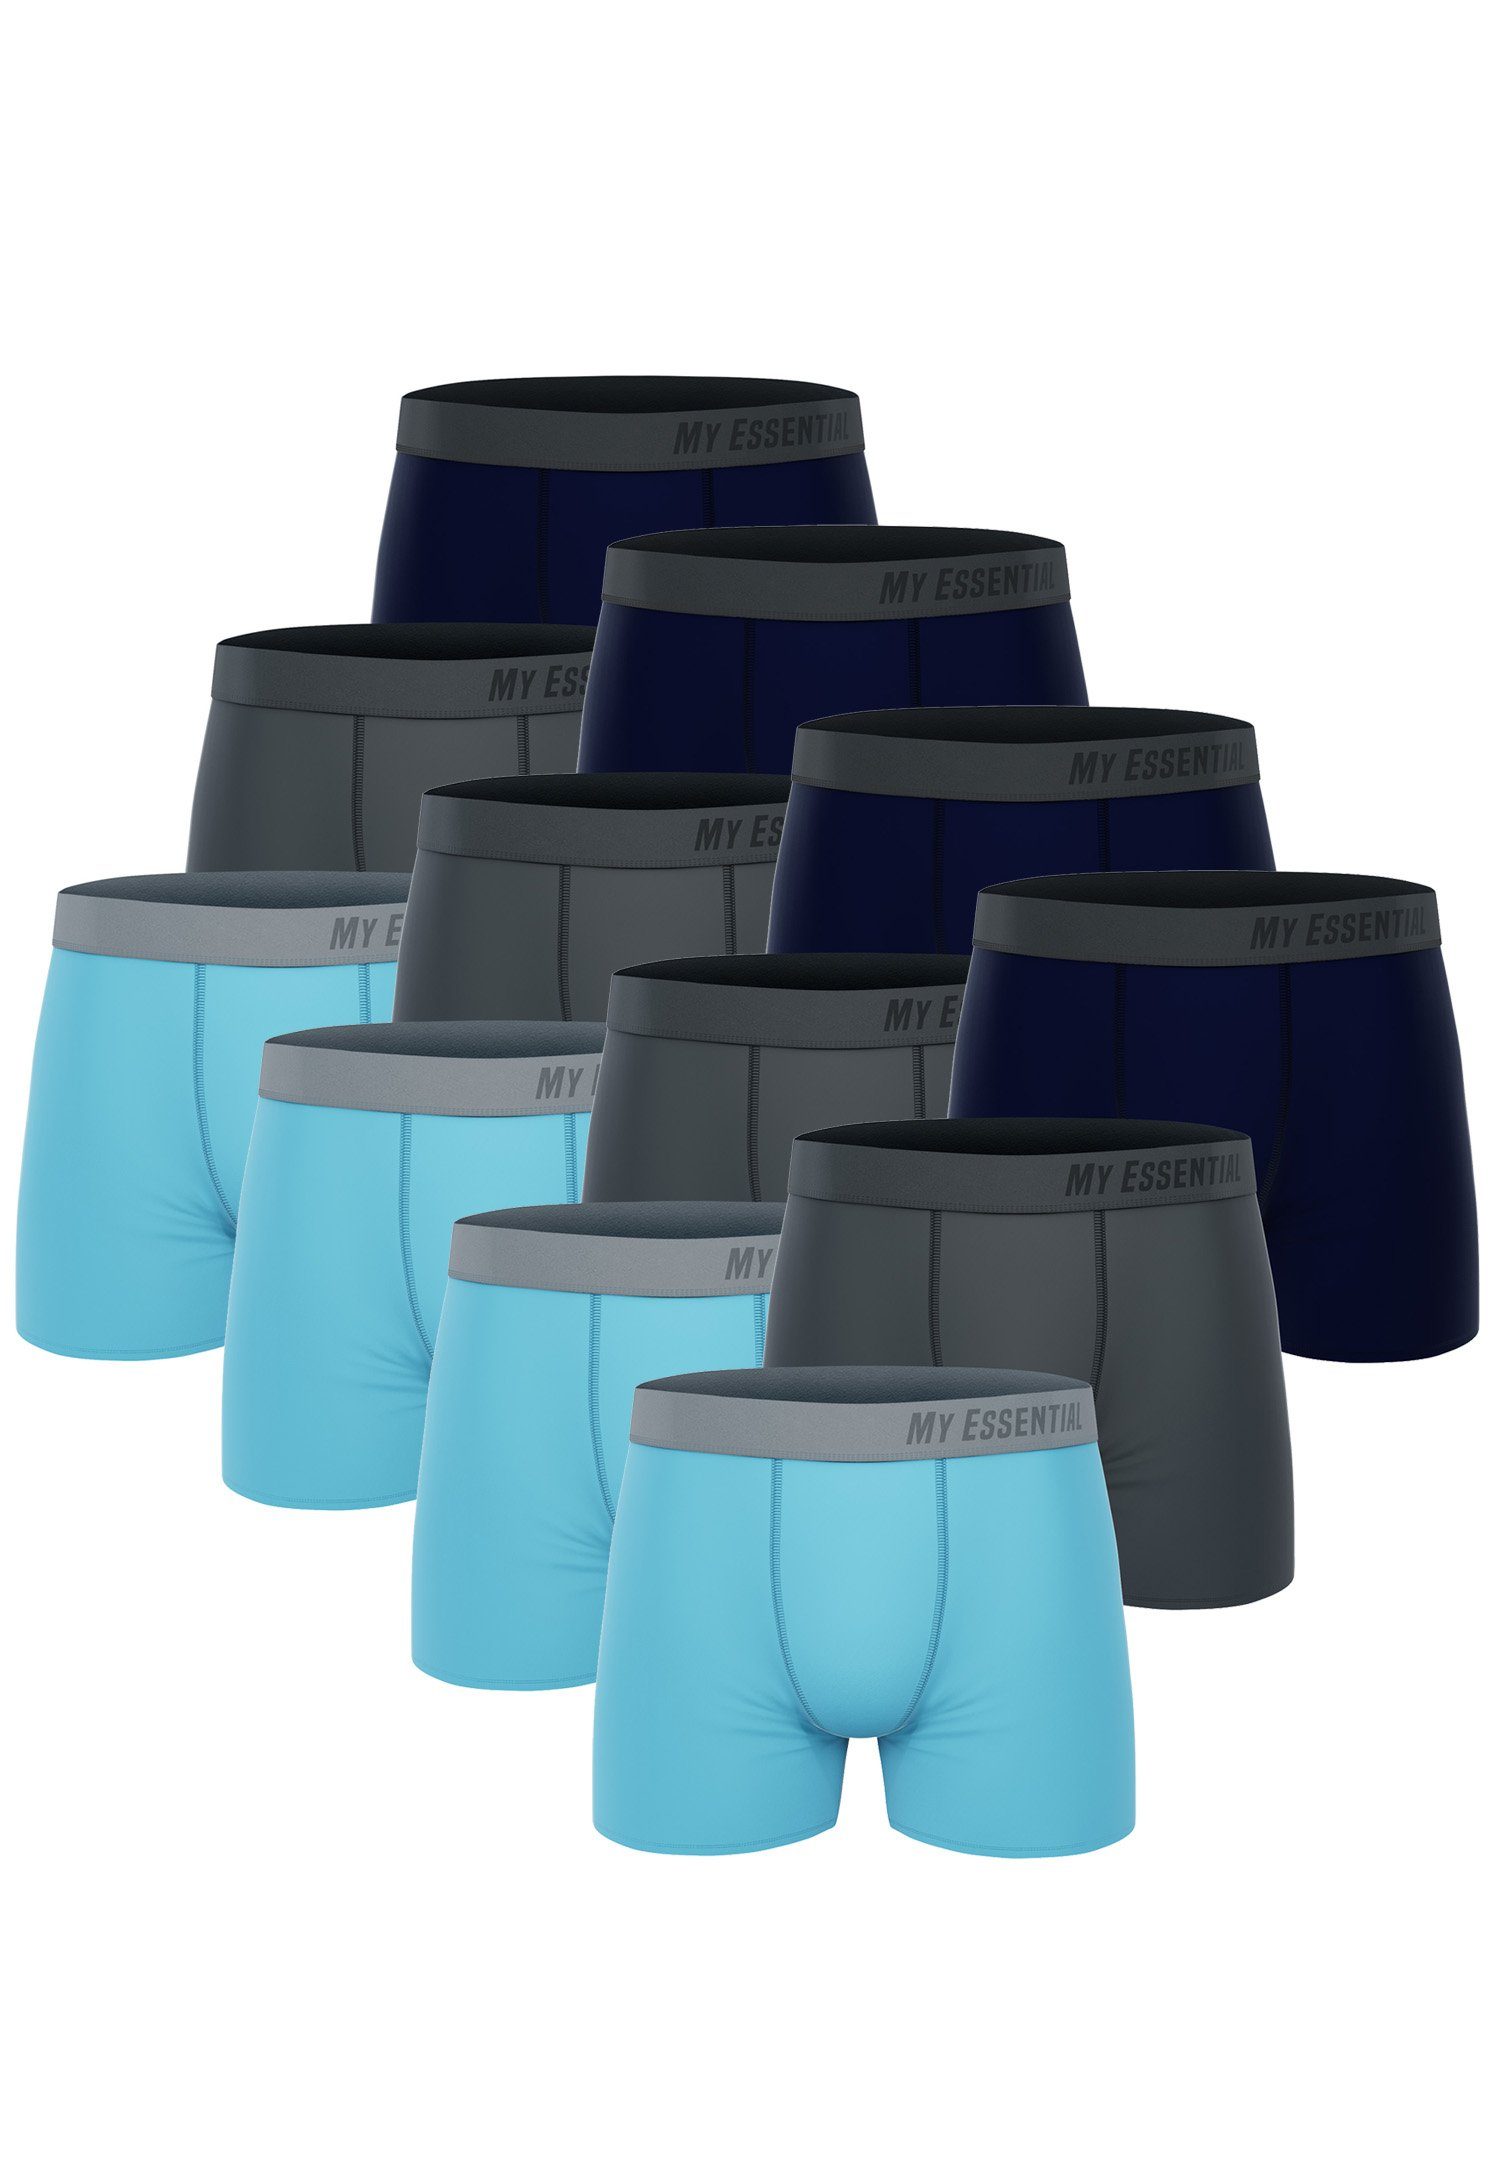 Blue Boxershorts Pack 12er-Pack) Cotton Essential 12-St., My Essential Boxers Bio My 12 Clothing (Spar-Pack,